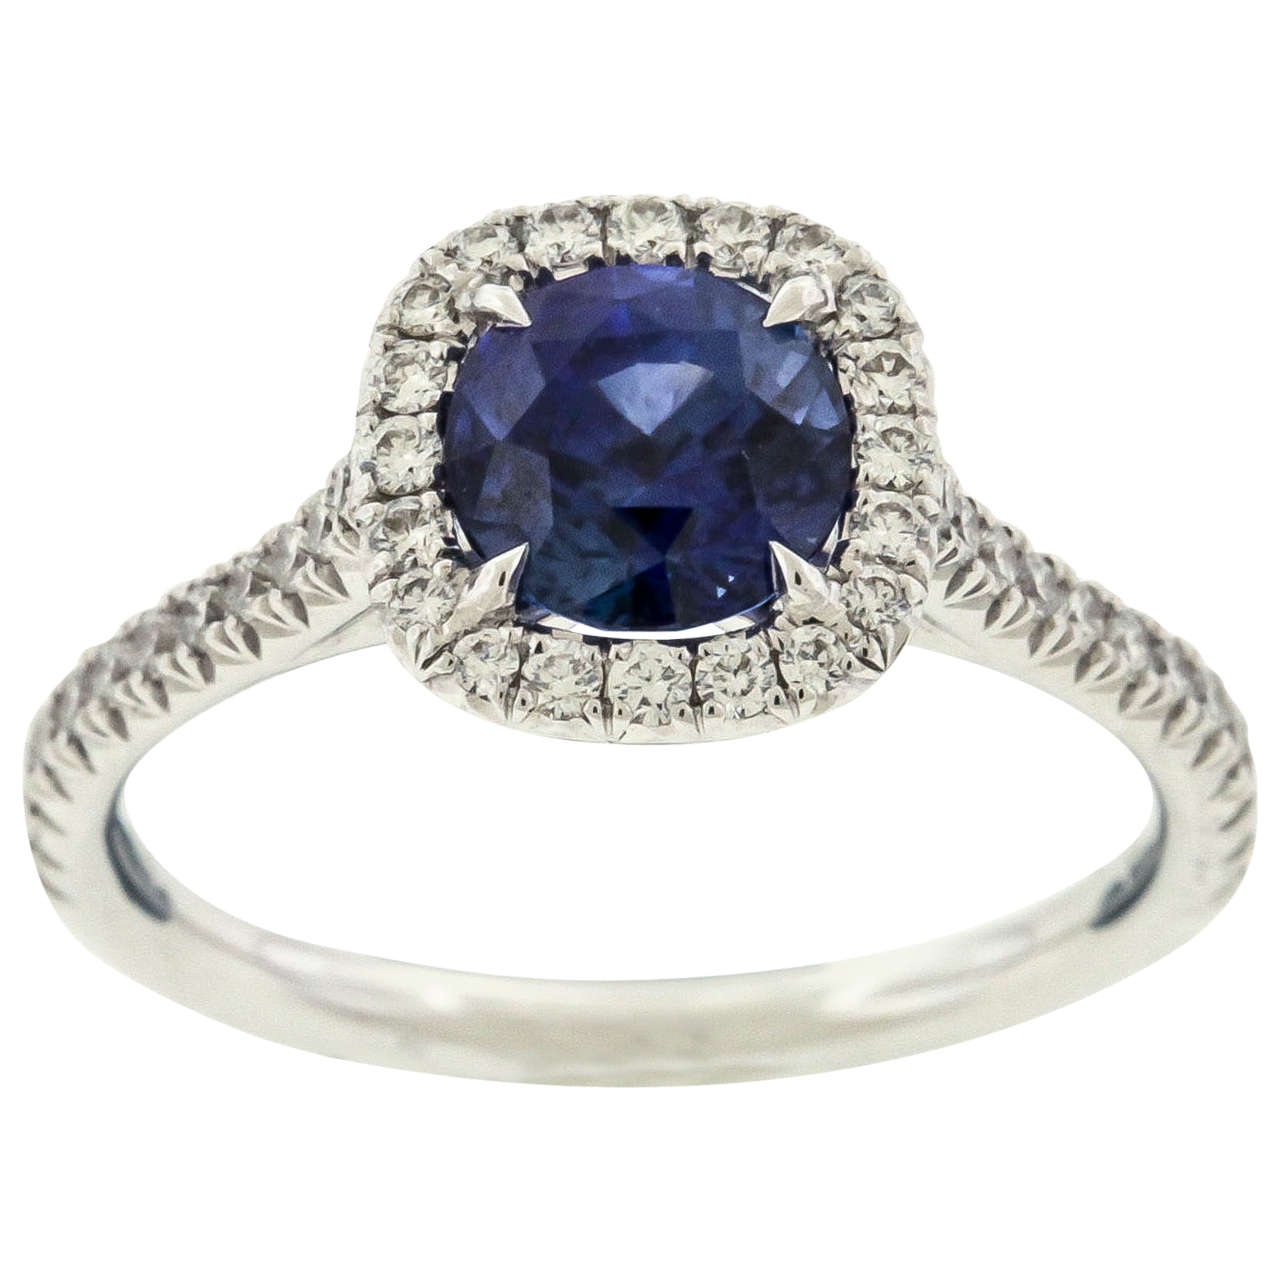 Sapphire Diamond Ring For Sale at 1stdibs